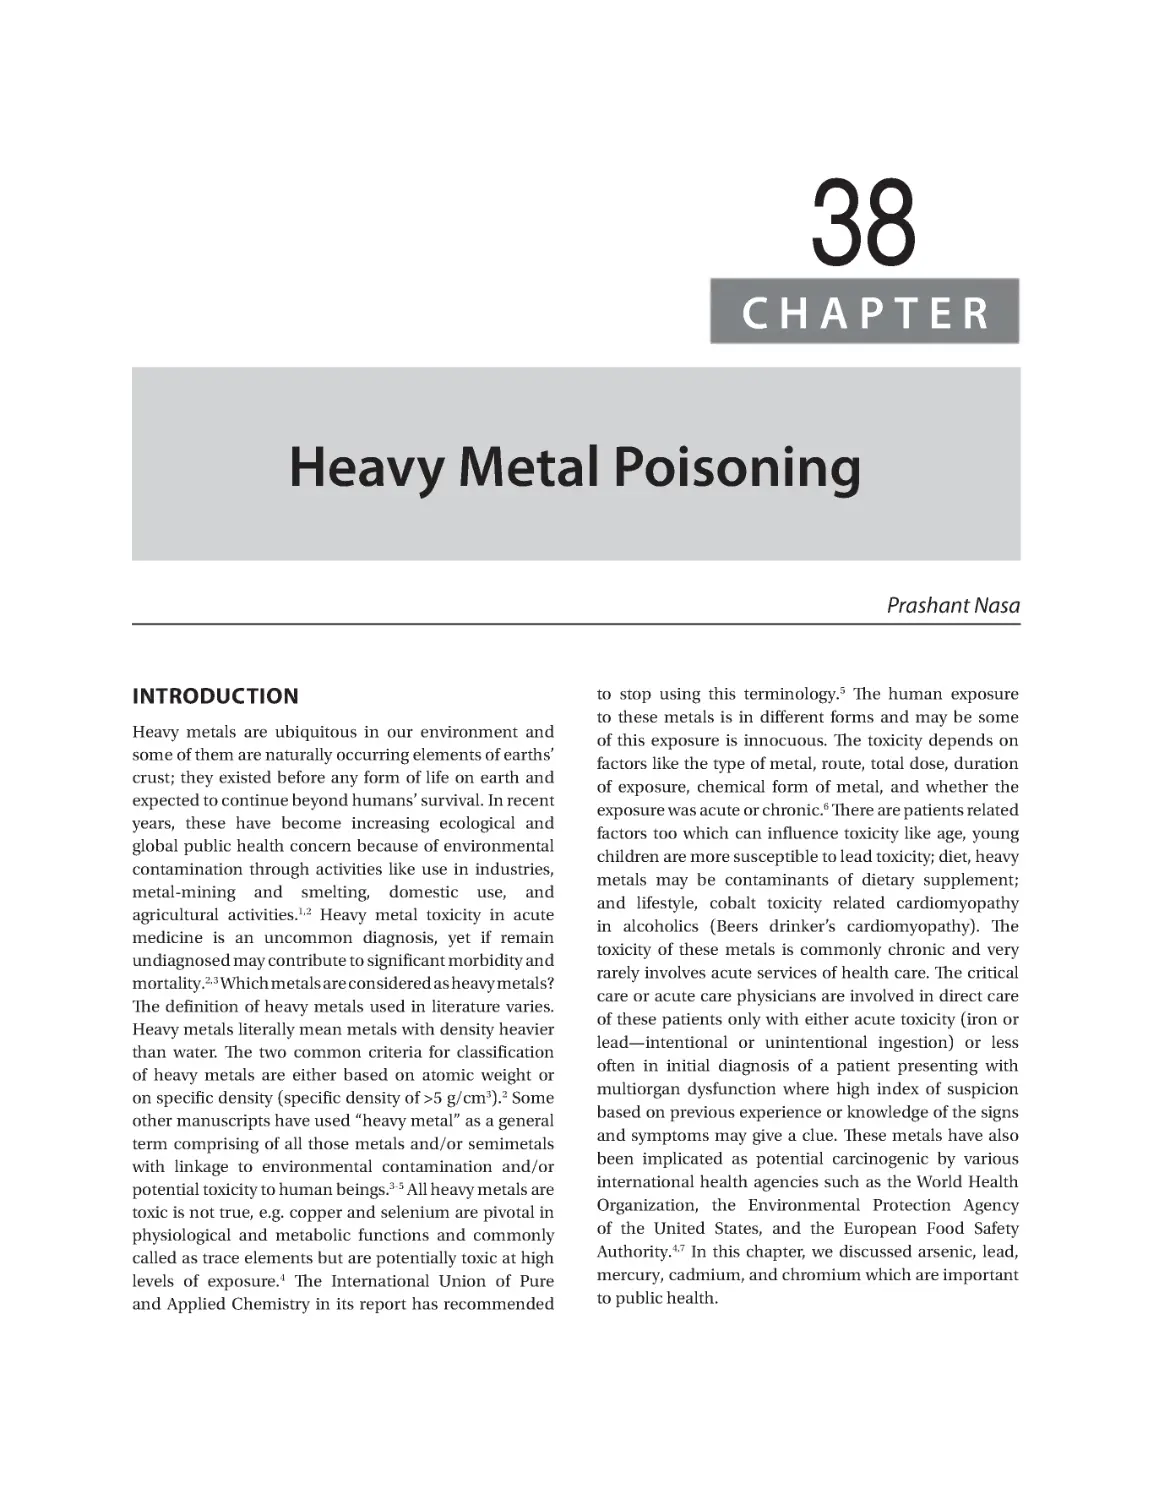 Chapter 38: Heavy Metal Poisoning